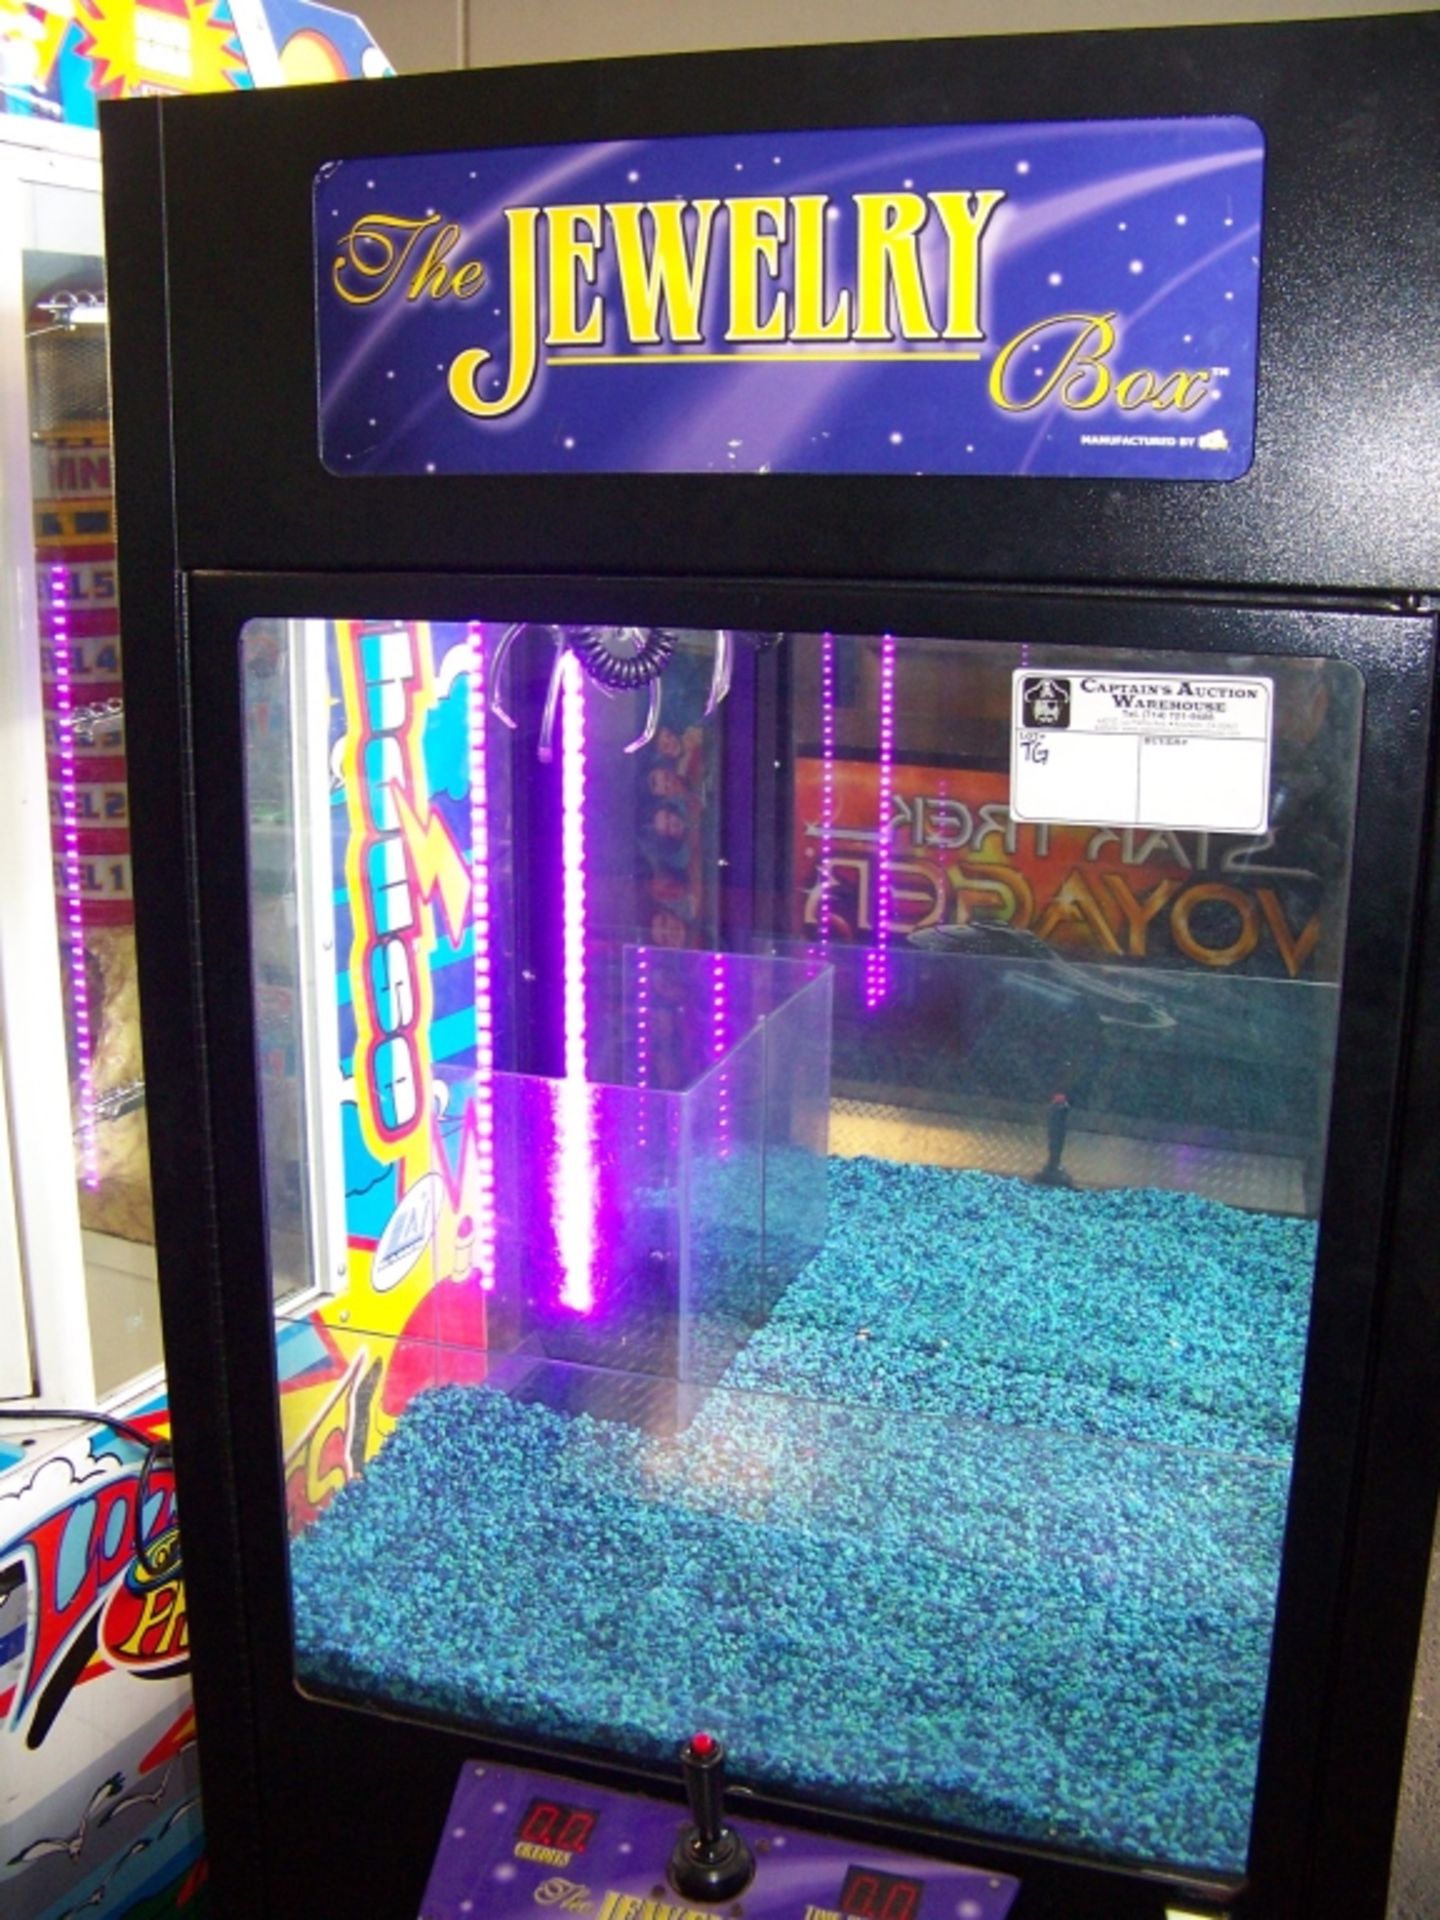 31"" ICE JEWELRY BOX PLUSH CLAW CRANE MACHINE Item is in used condition. Evidence of wear and - Image 5 of 6